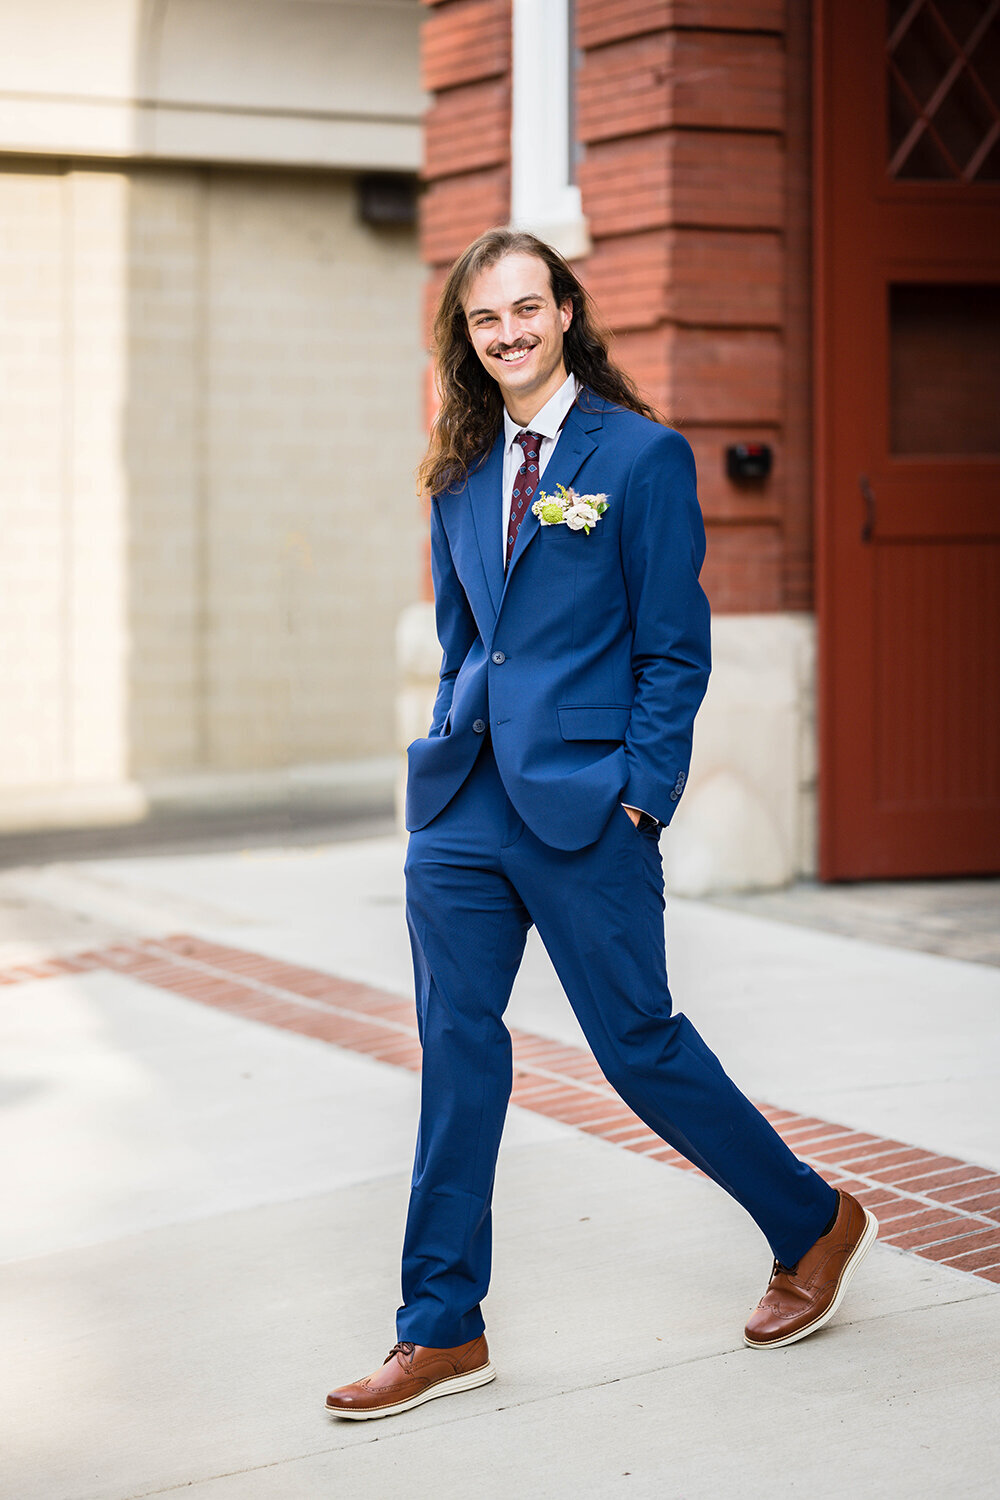 A groom in a navy suit walks with his hands in his pockets and smiles towards something behind the photographer (not photographed) on his elopement day in Downtown Roanoke.